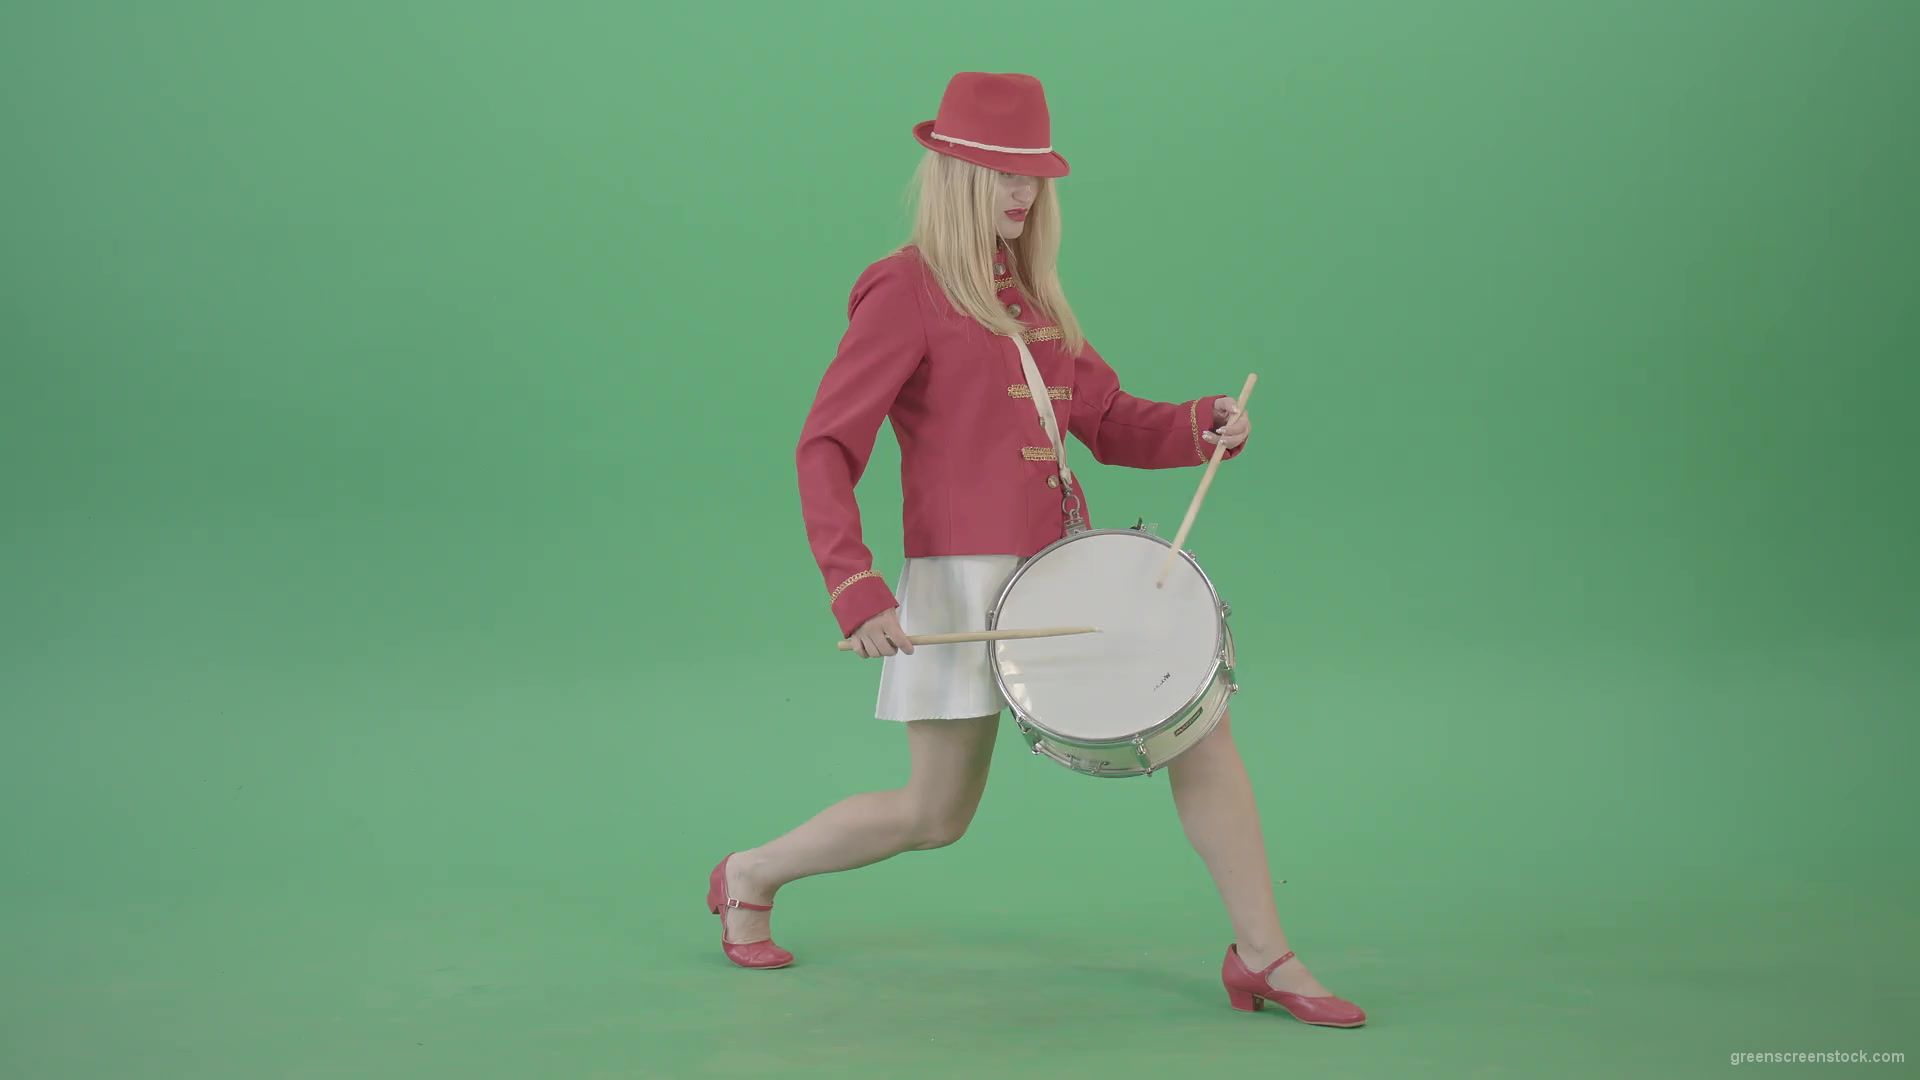 Blonde-Girl-in-Red-Uniform-making-beats-on-music-drum-instrument-in-active-pose-on-green-screen-4K-Video-Footage-1920_001 Green Screen Stock